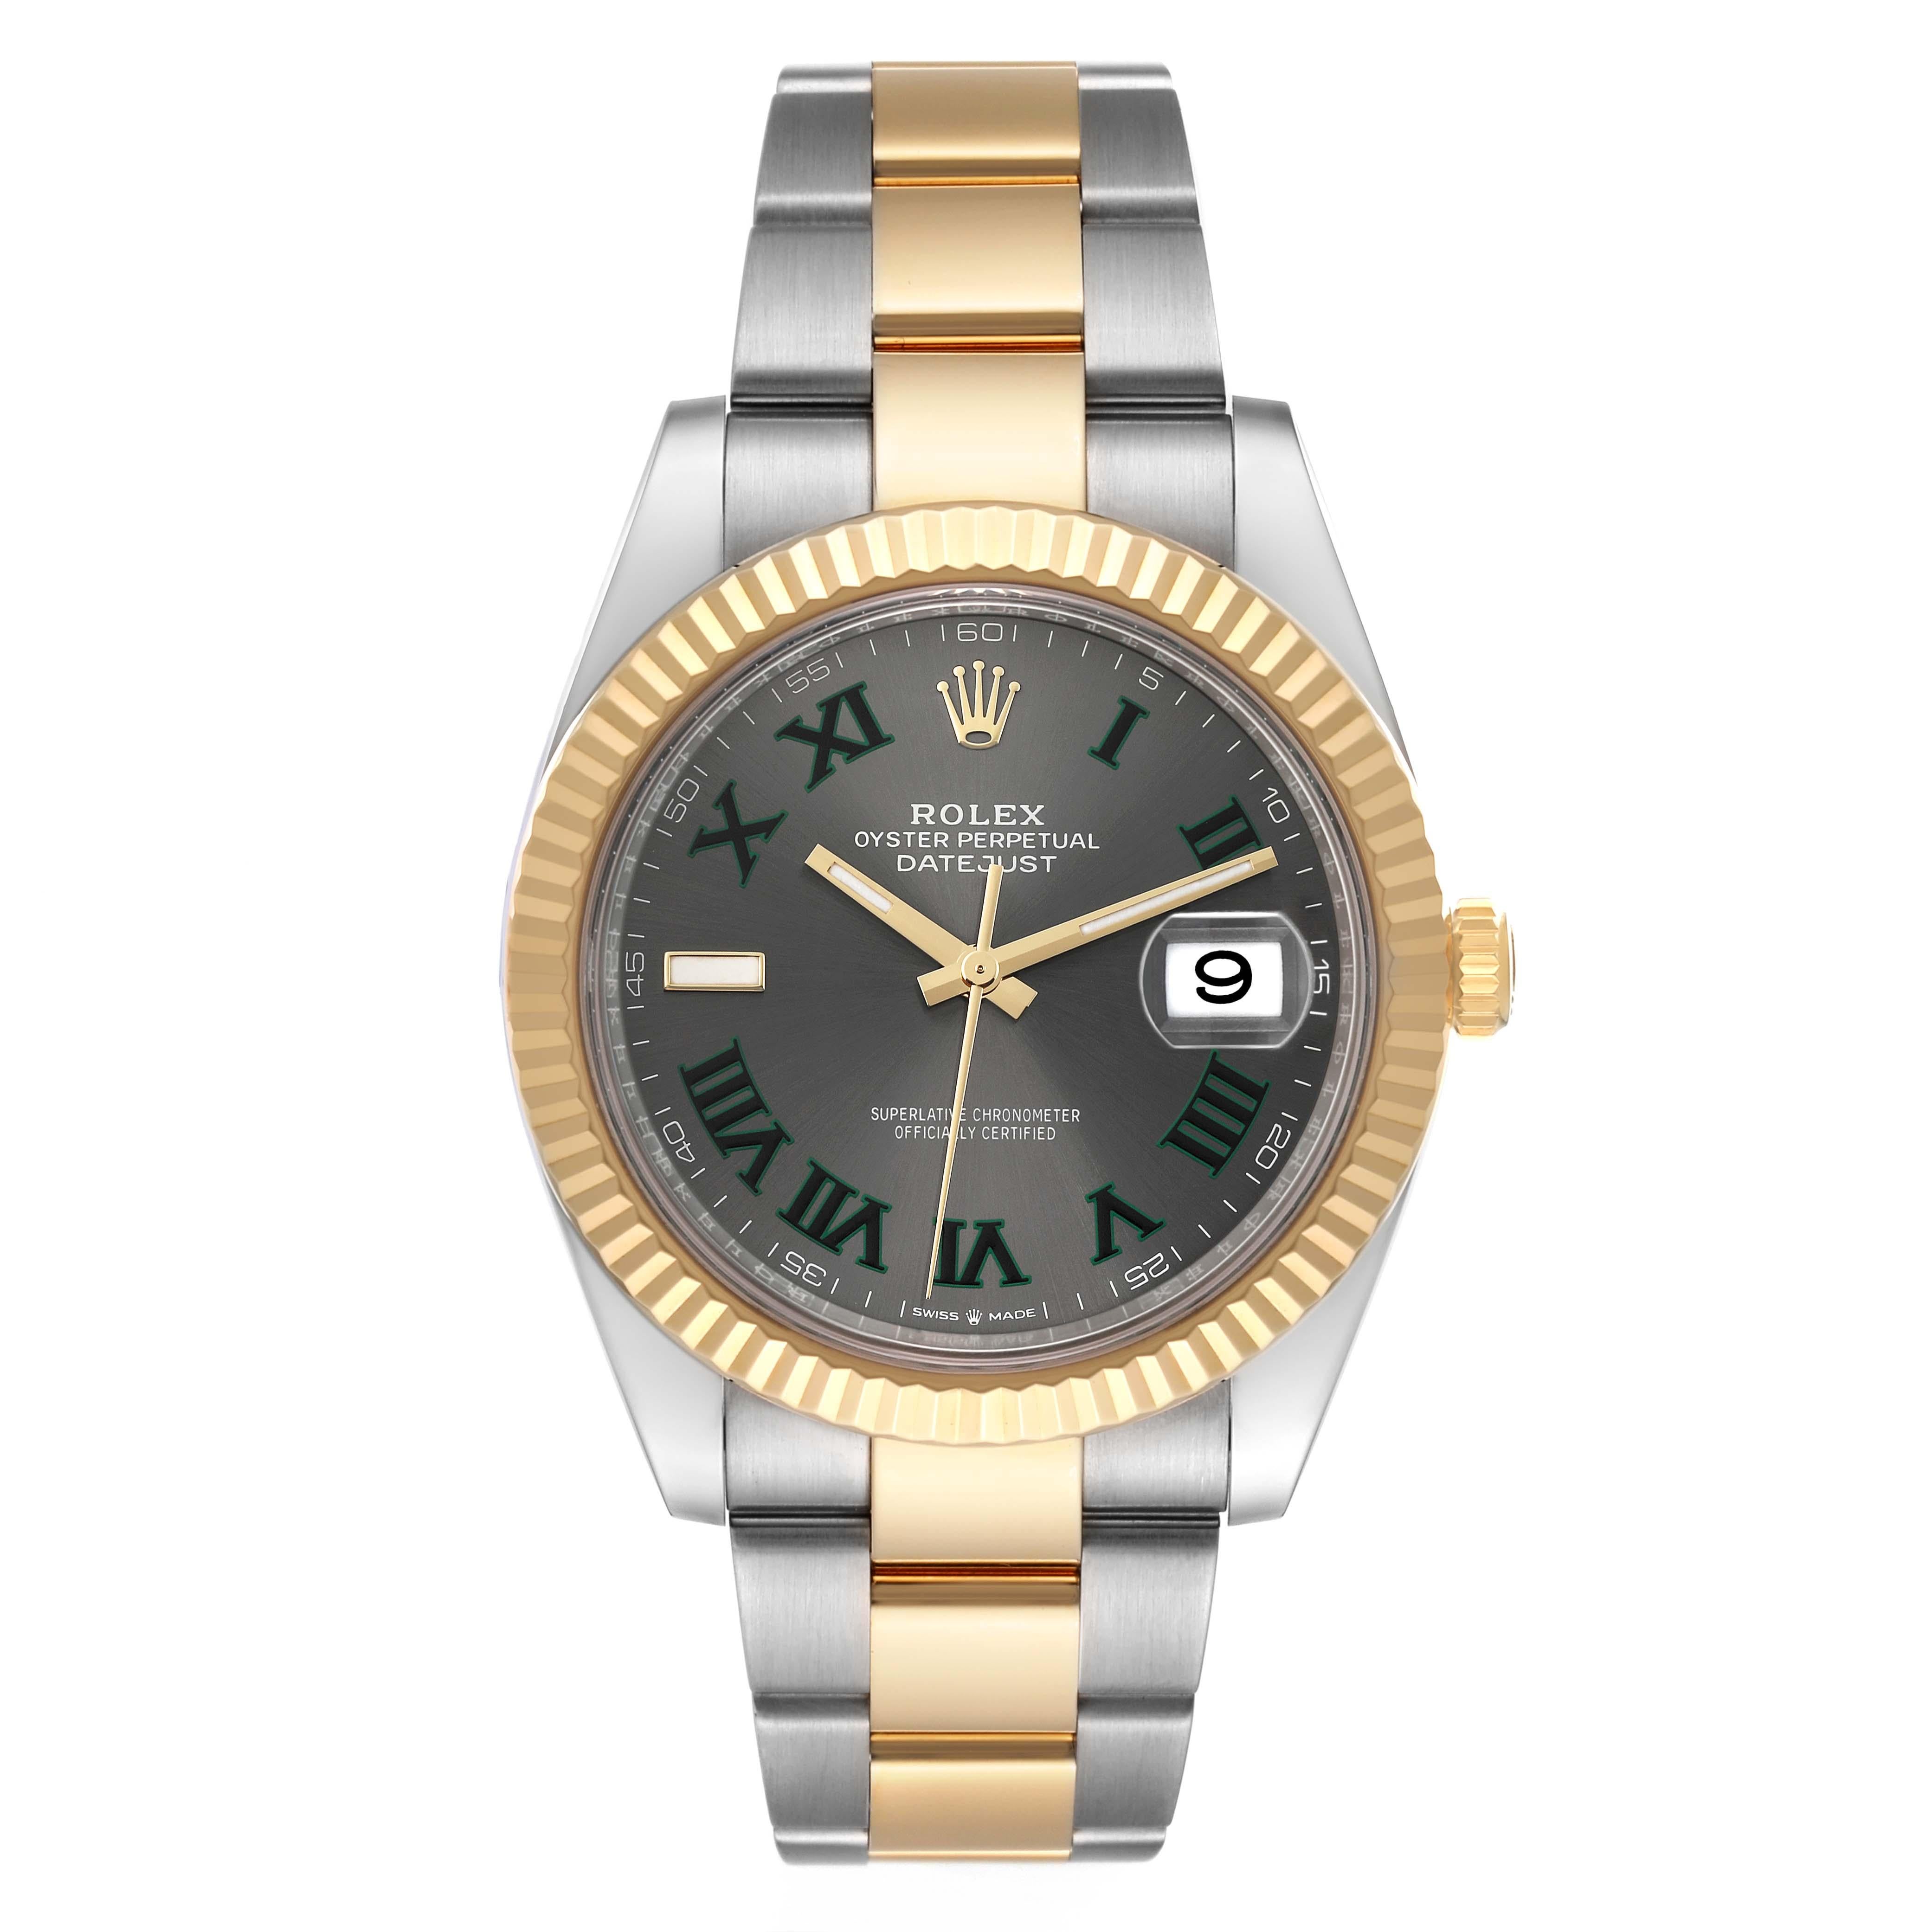 Rolex Datejust 41 Steel Yellow Gold Wimbledon Dial Mens Watch 126333 Box Card. Officially certified chronometer automatic self-winding movement with quickset date. Stainless steel and 18K yellow gold case 41.0 mm in diameter. Rolex logo on a crown.